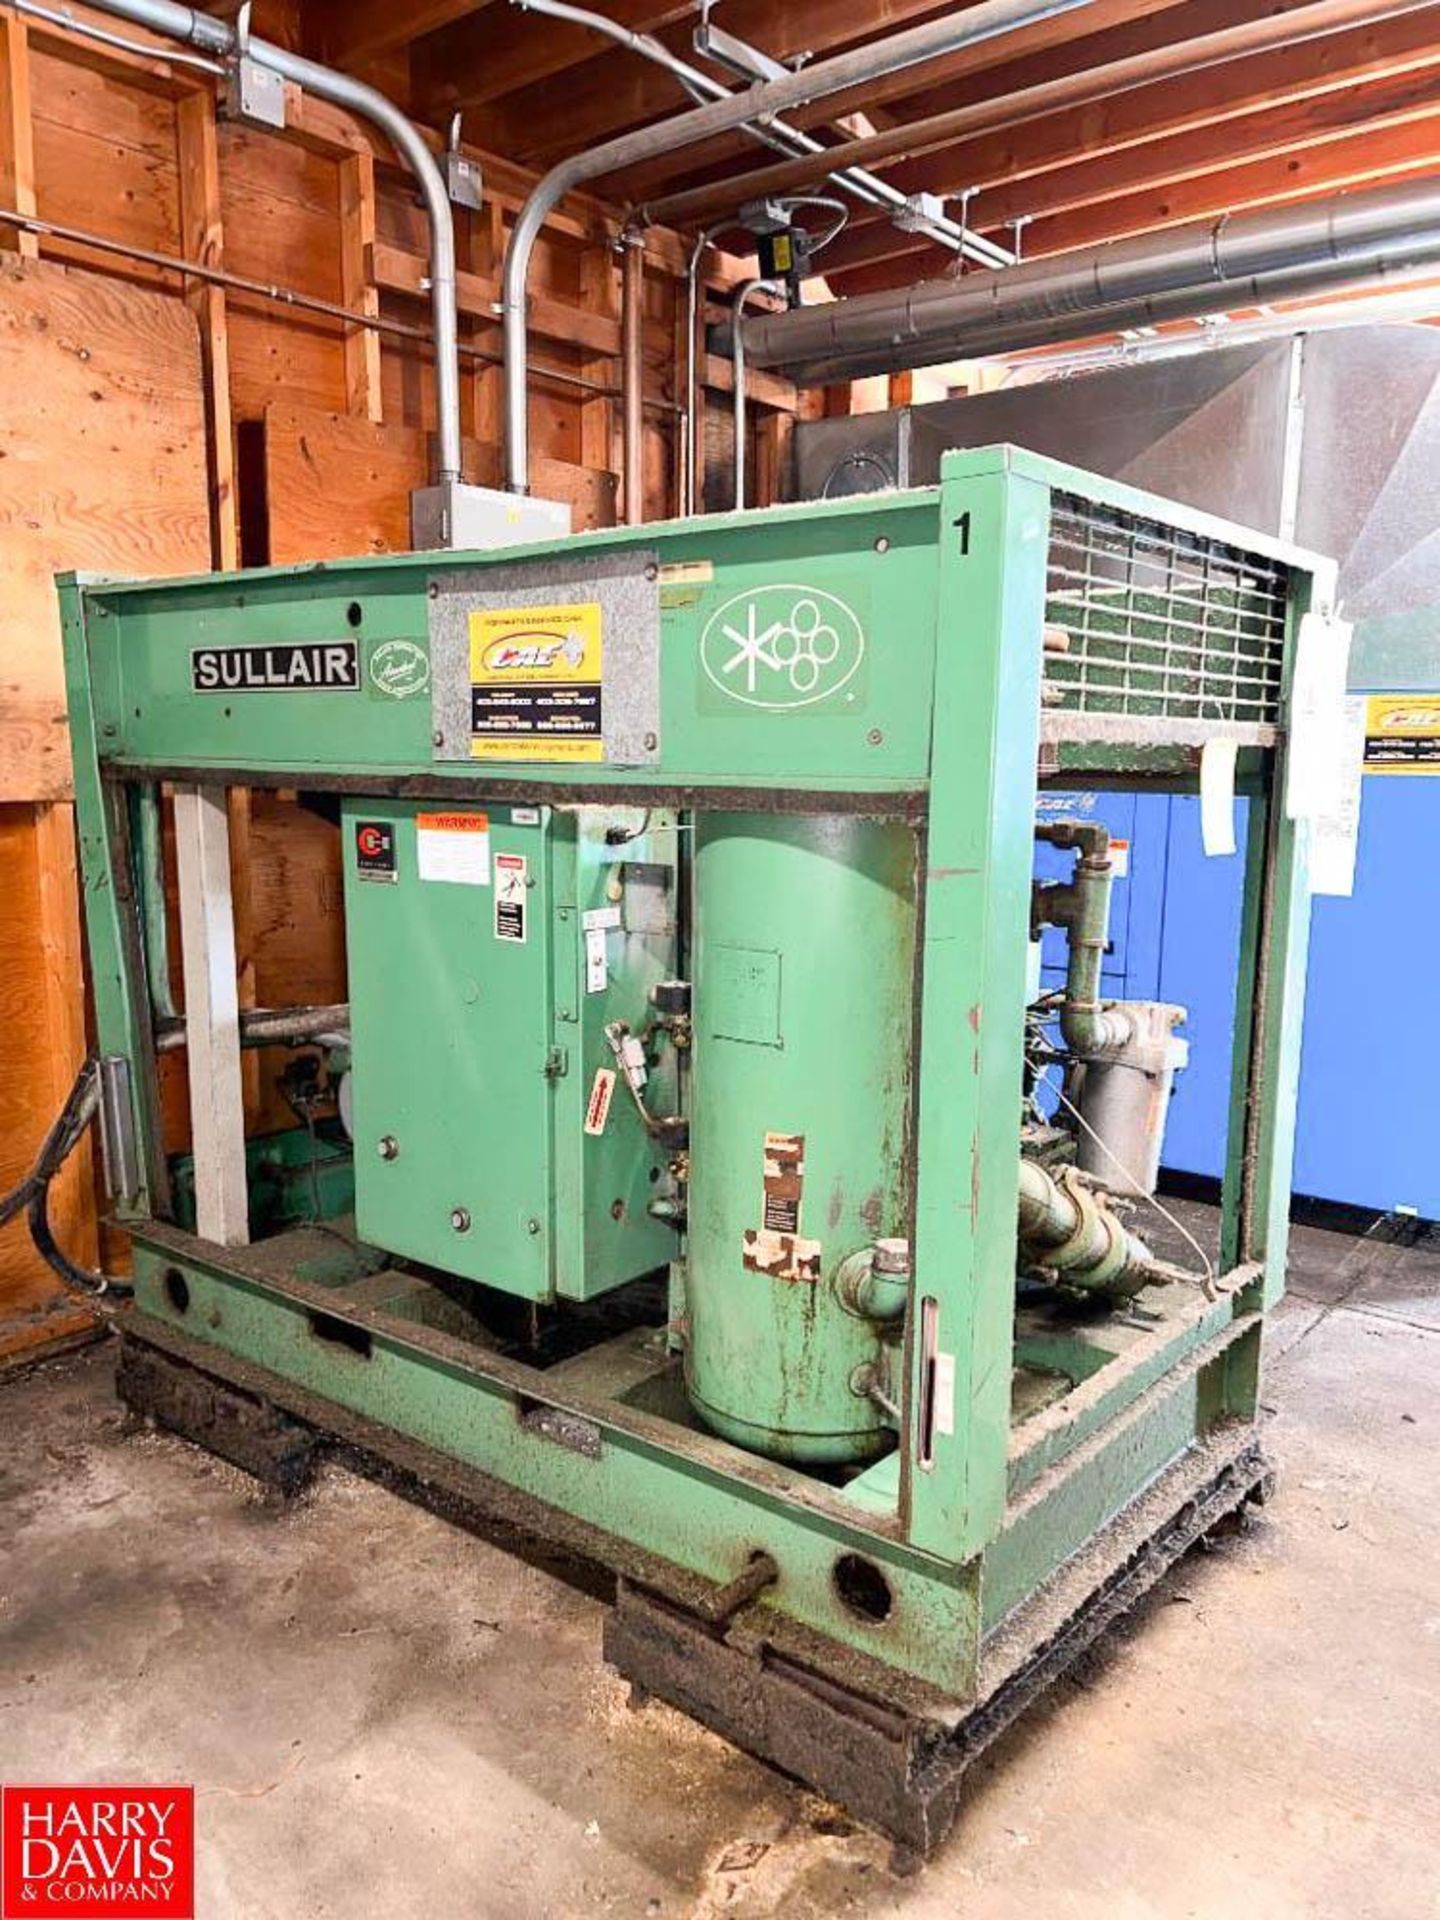 Sullair 50 HP, 125 PSIG Air Compressor, Model: 12B-50H, S/N: 003-57148 with Controls - Image 2 of 3